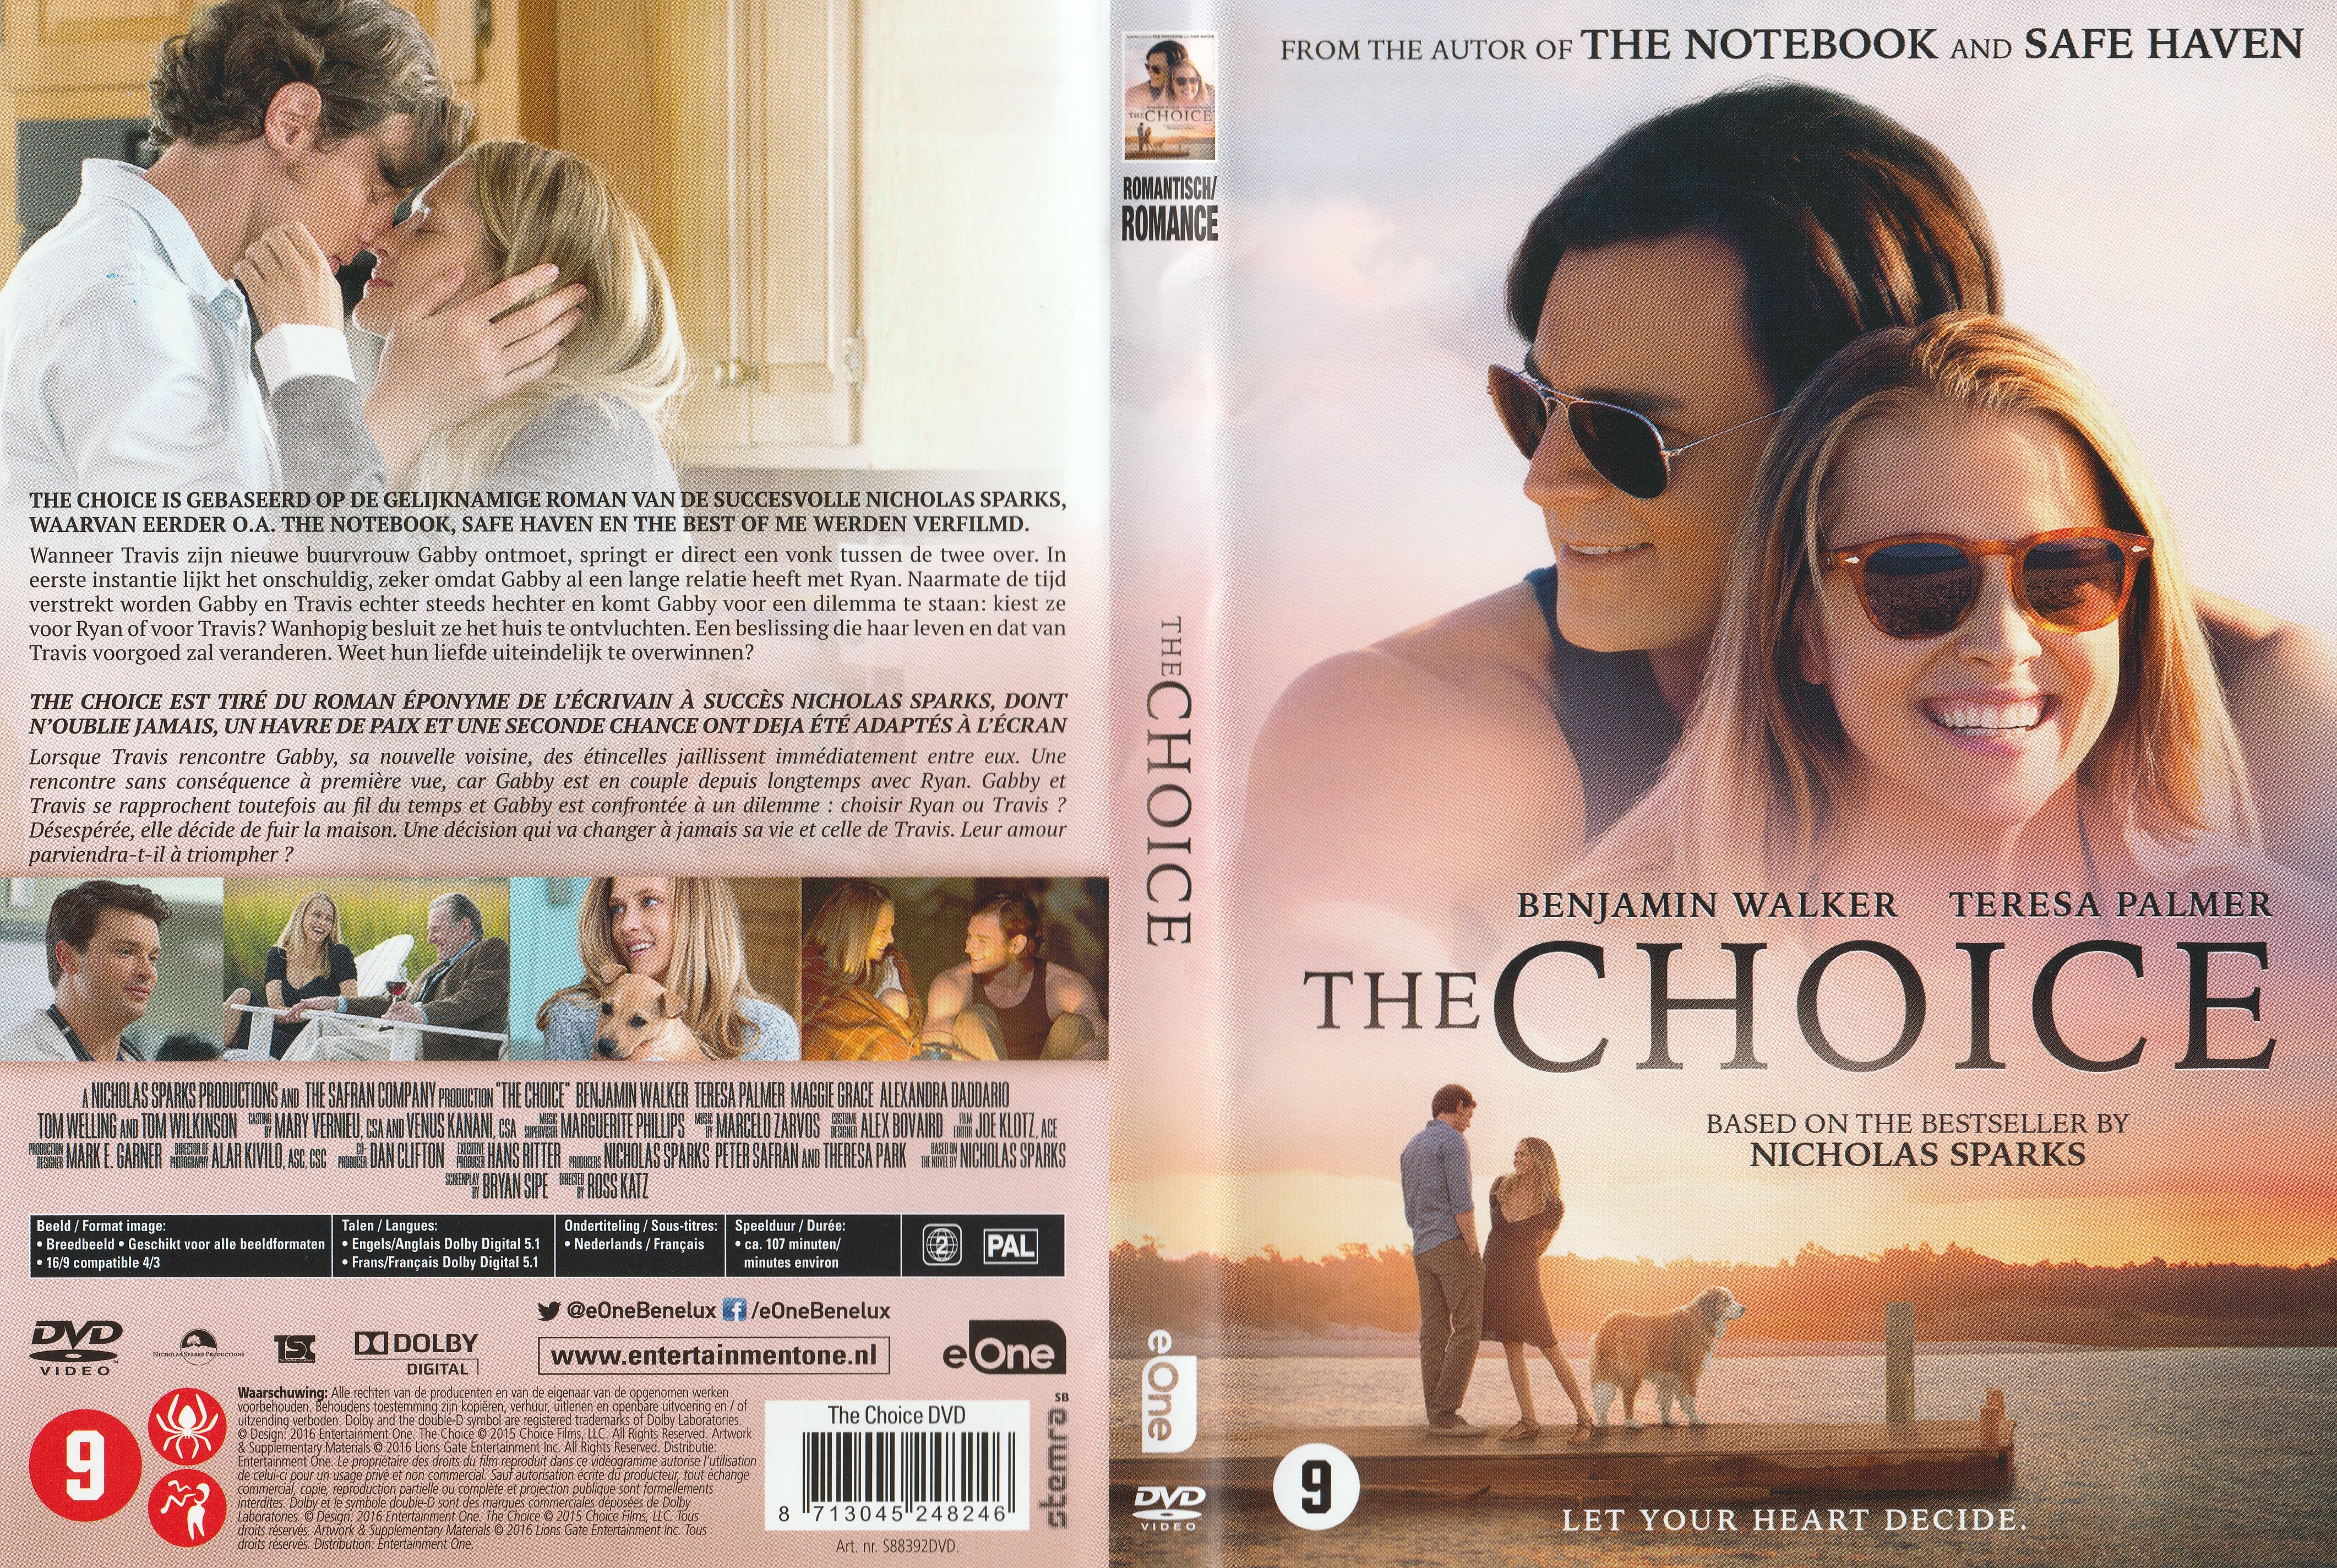 Jaquette DVD The choice